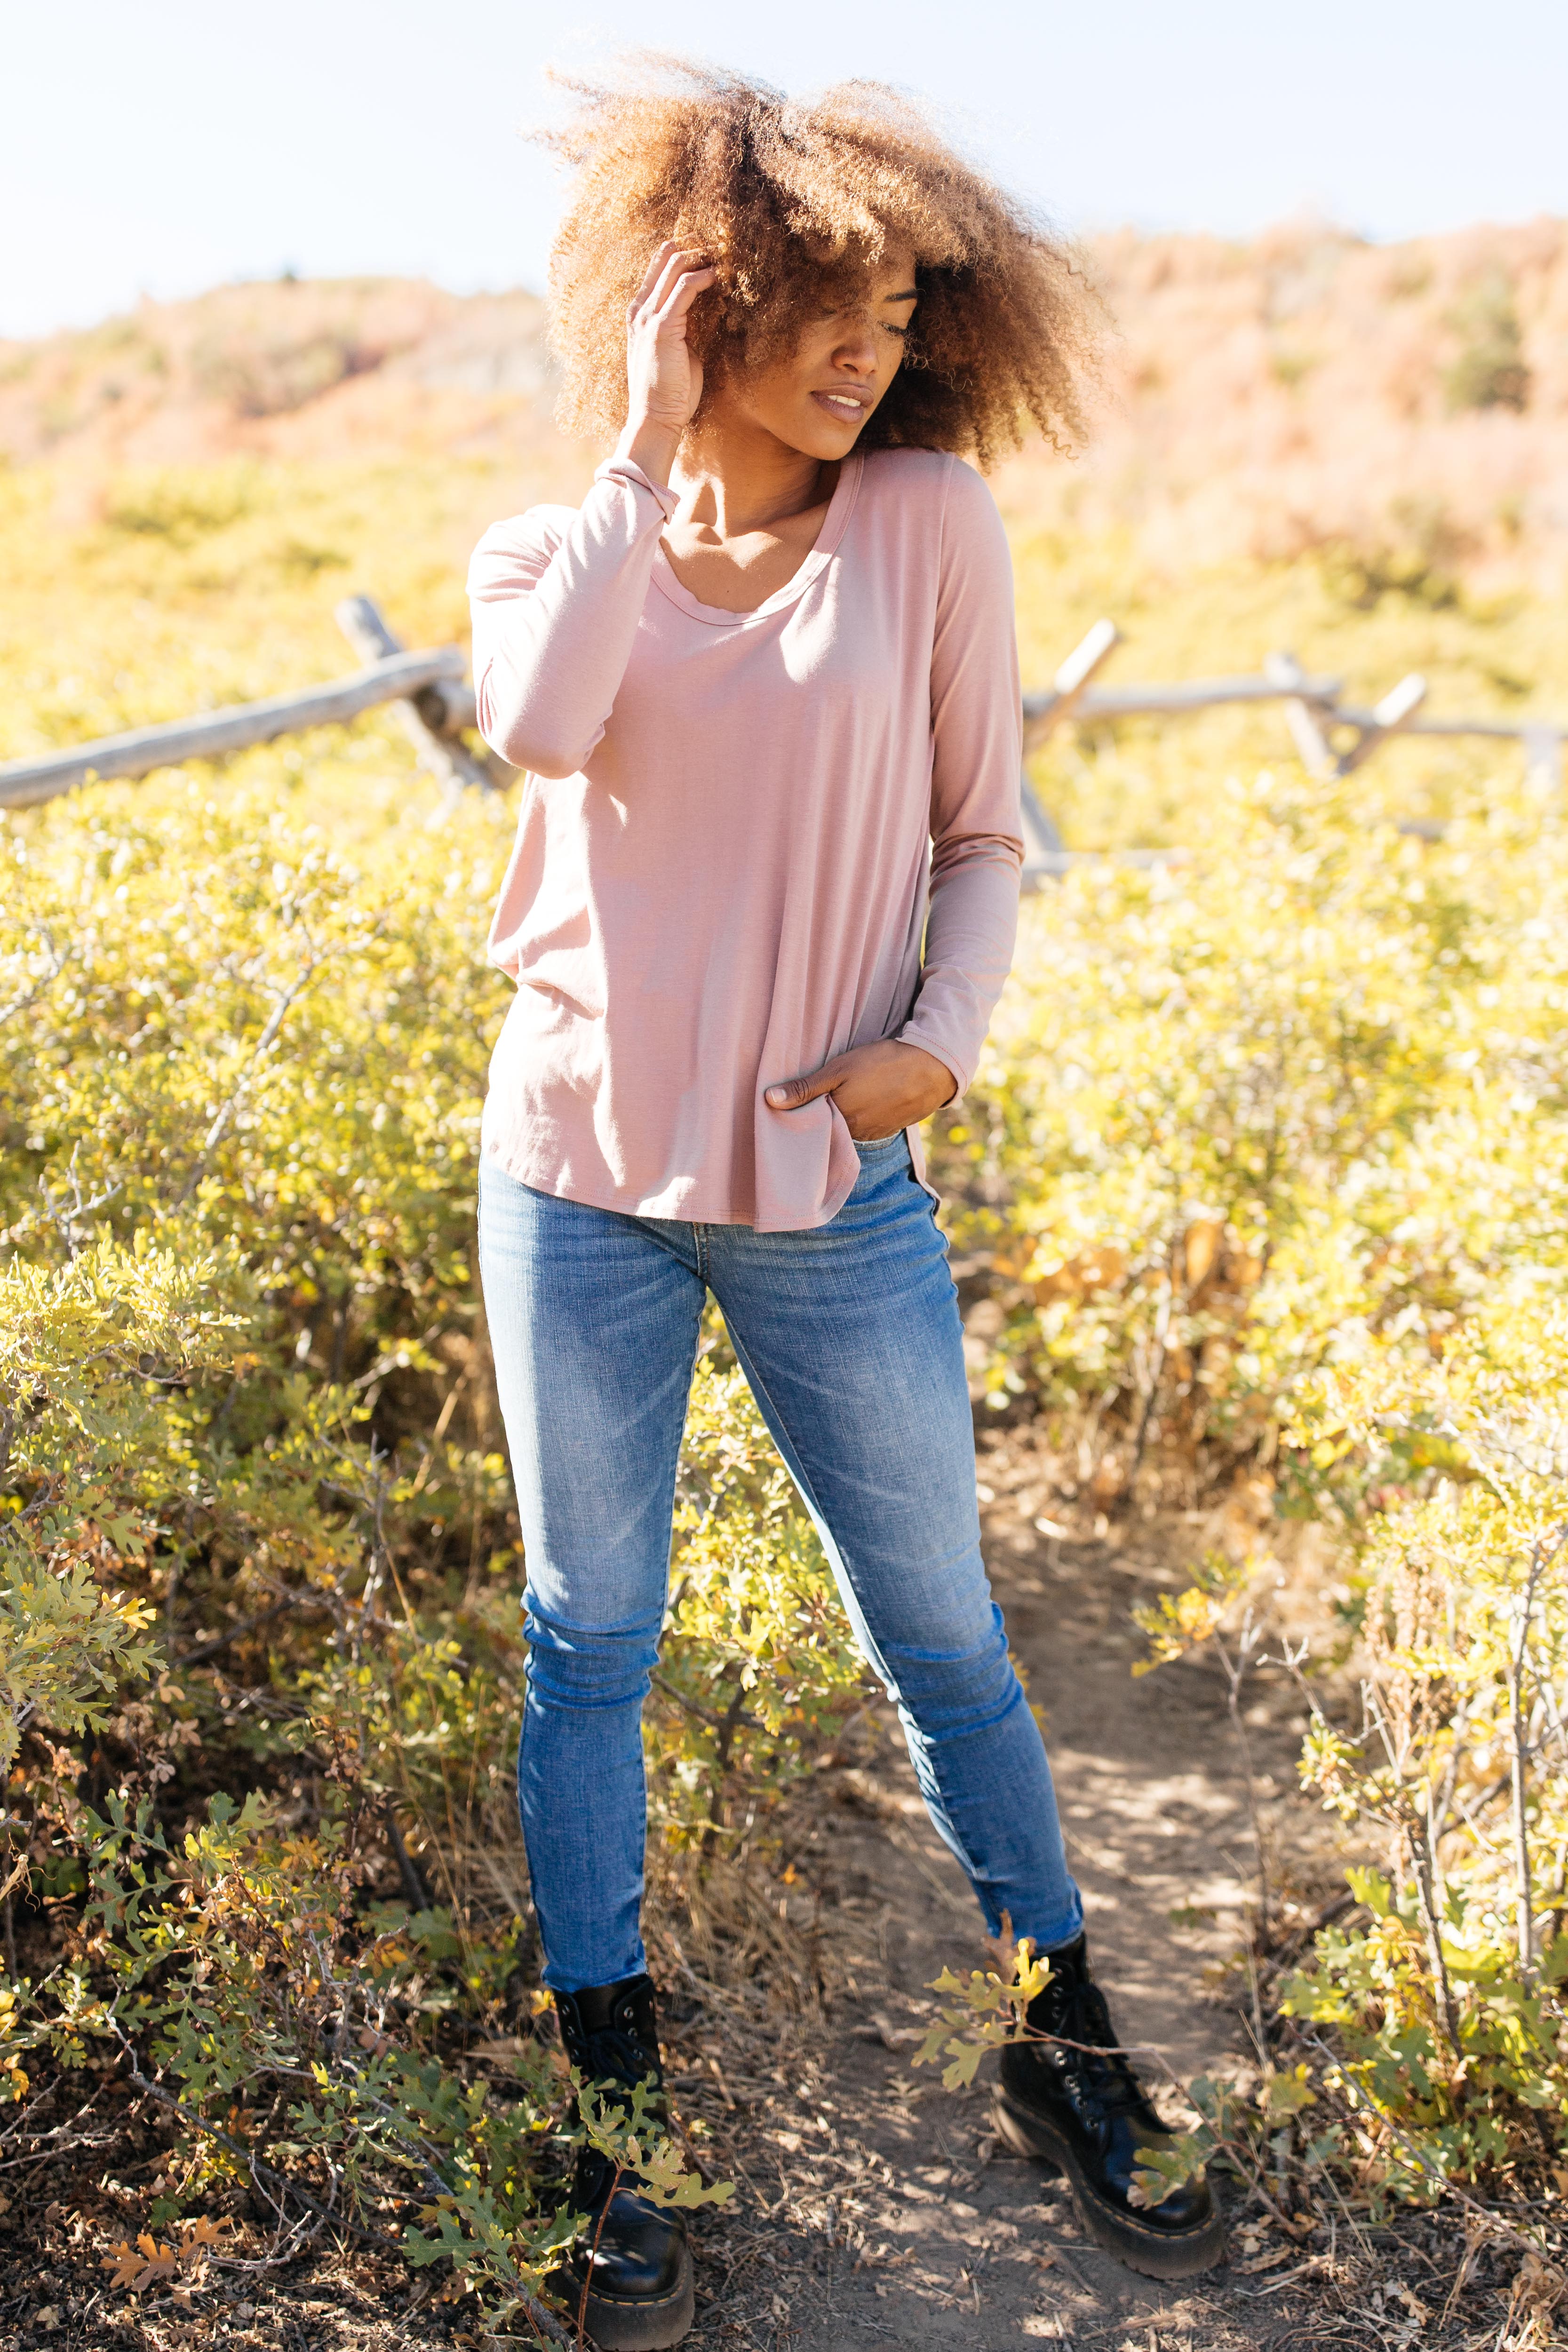 Every Girl's Favorite Basic Top in Mauve